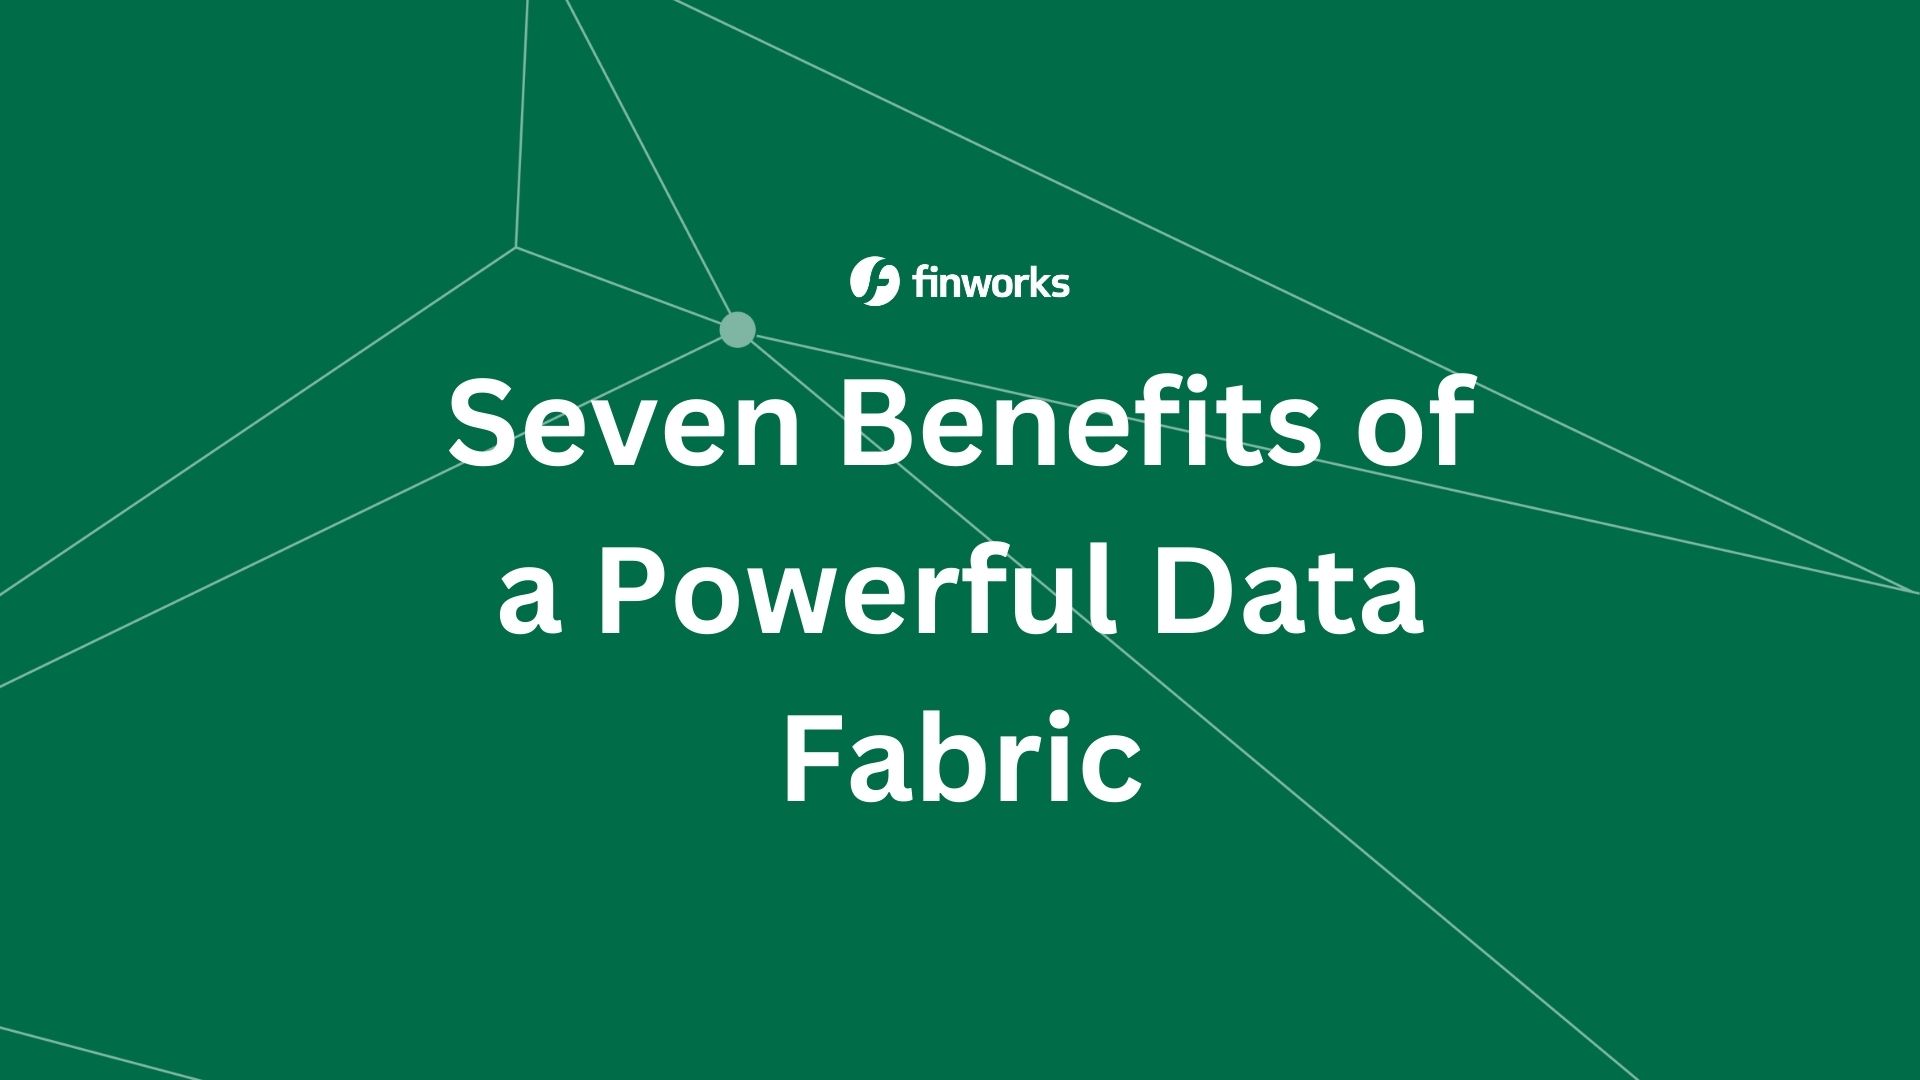 Seven Benefits of a Powerful Data Fabric